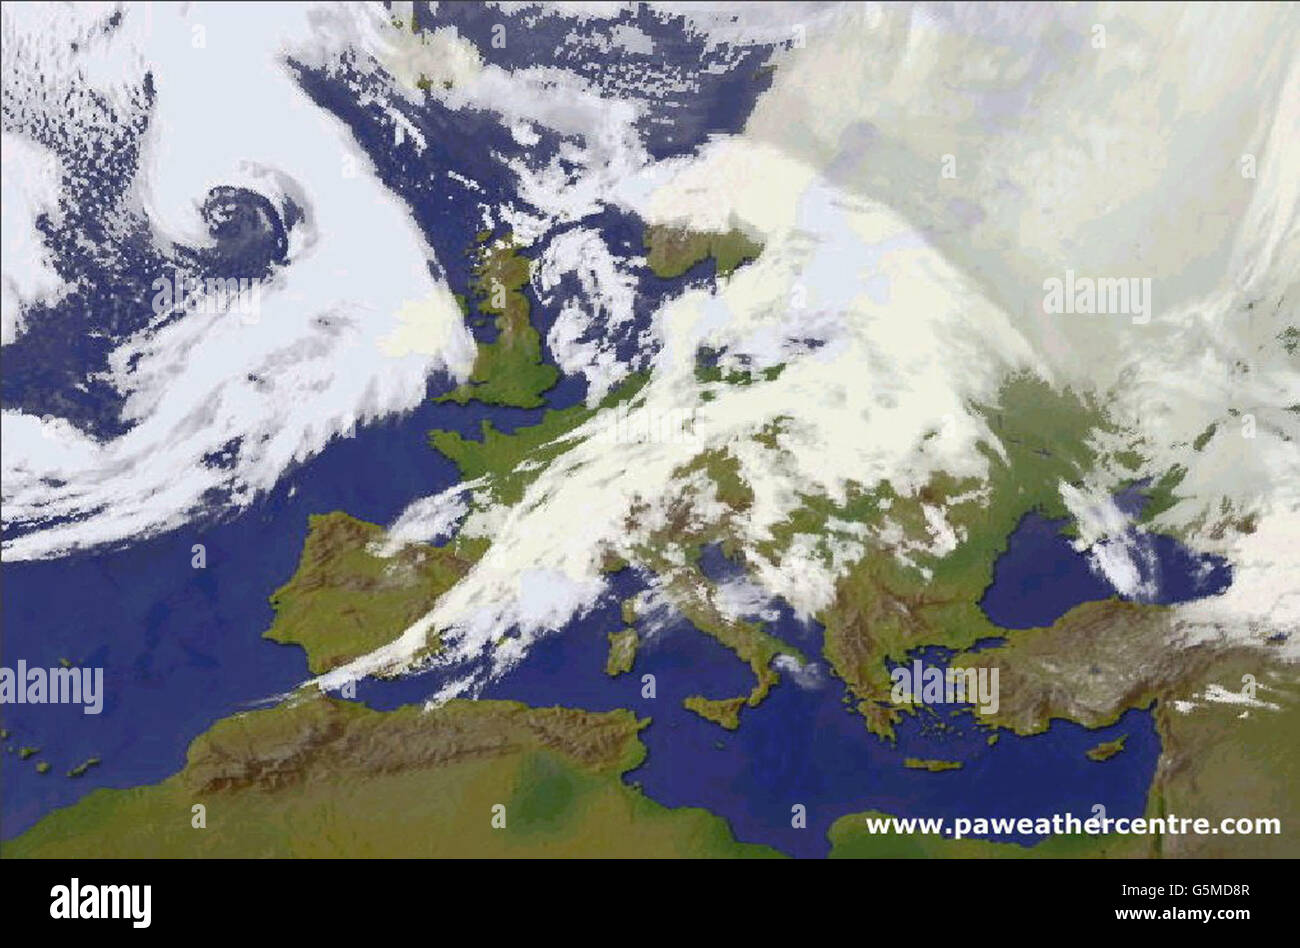 A PA Weather Centre satellite scan taken, as Britain prepares itself for another wave of severe gales. Weather forecasters predict gusts of 80mph will affect some parts of the country, although they do not expect conditions to be as severe as Monday's violent storms. Stock Photo